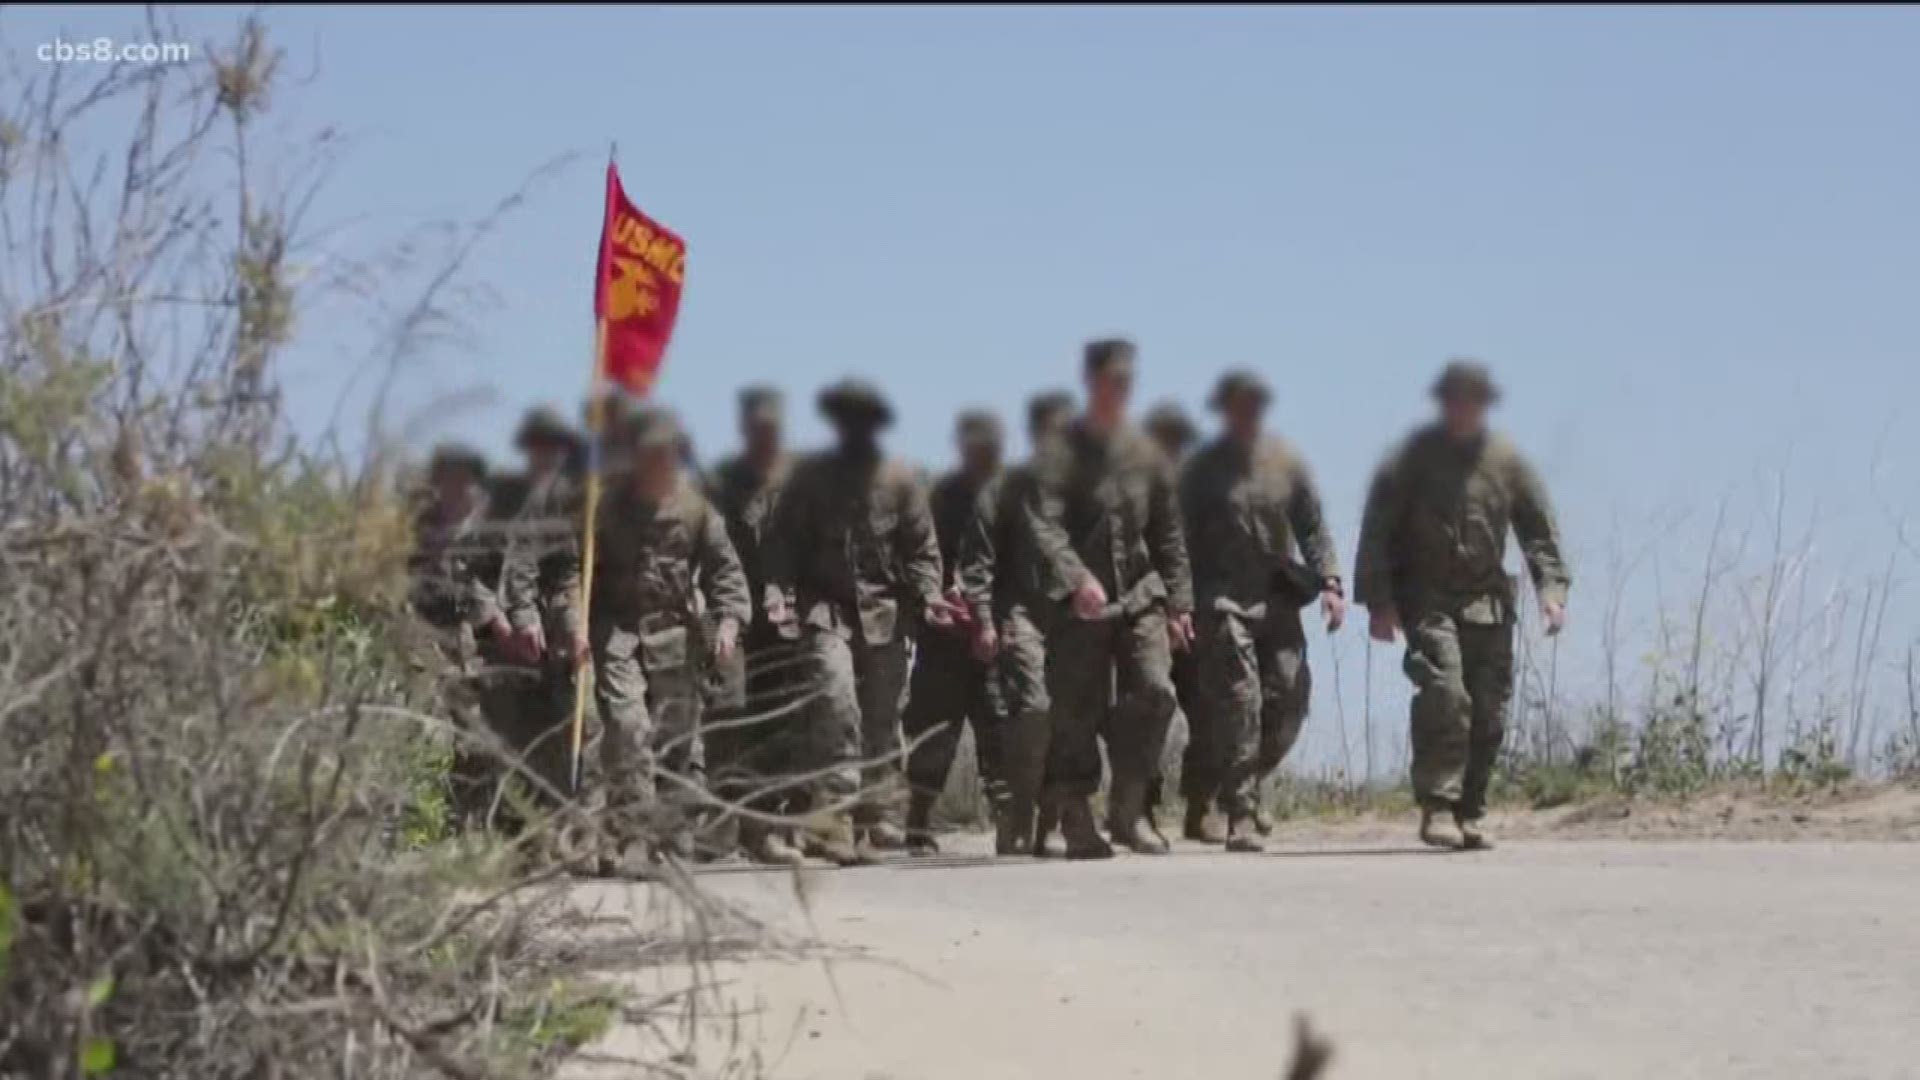 Sixteen US Marines were arrested Thursday at Camp Pendleton for alleged involvement in various illegal activities ranging from human smuggling to drug-related offenses, according to a Marine Corps statement.